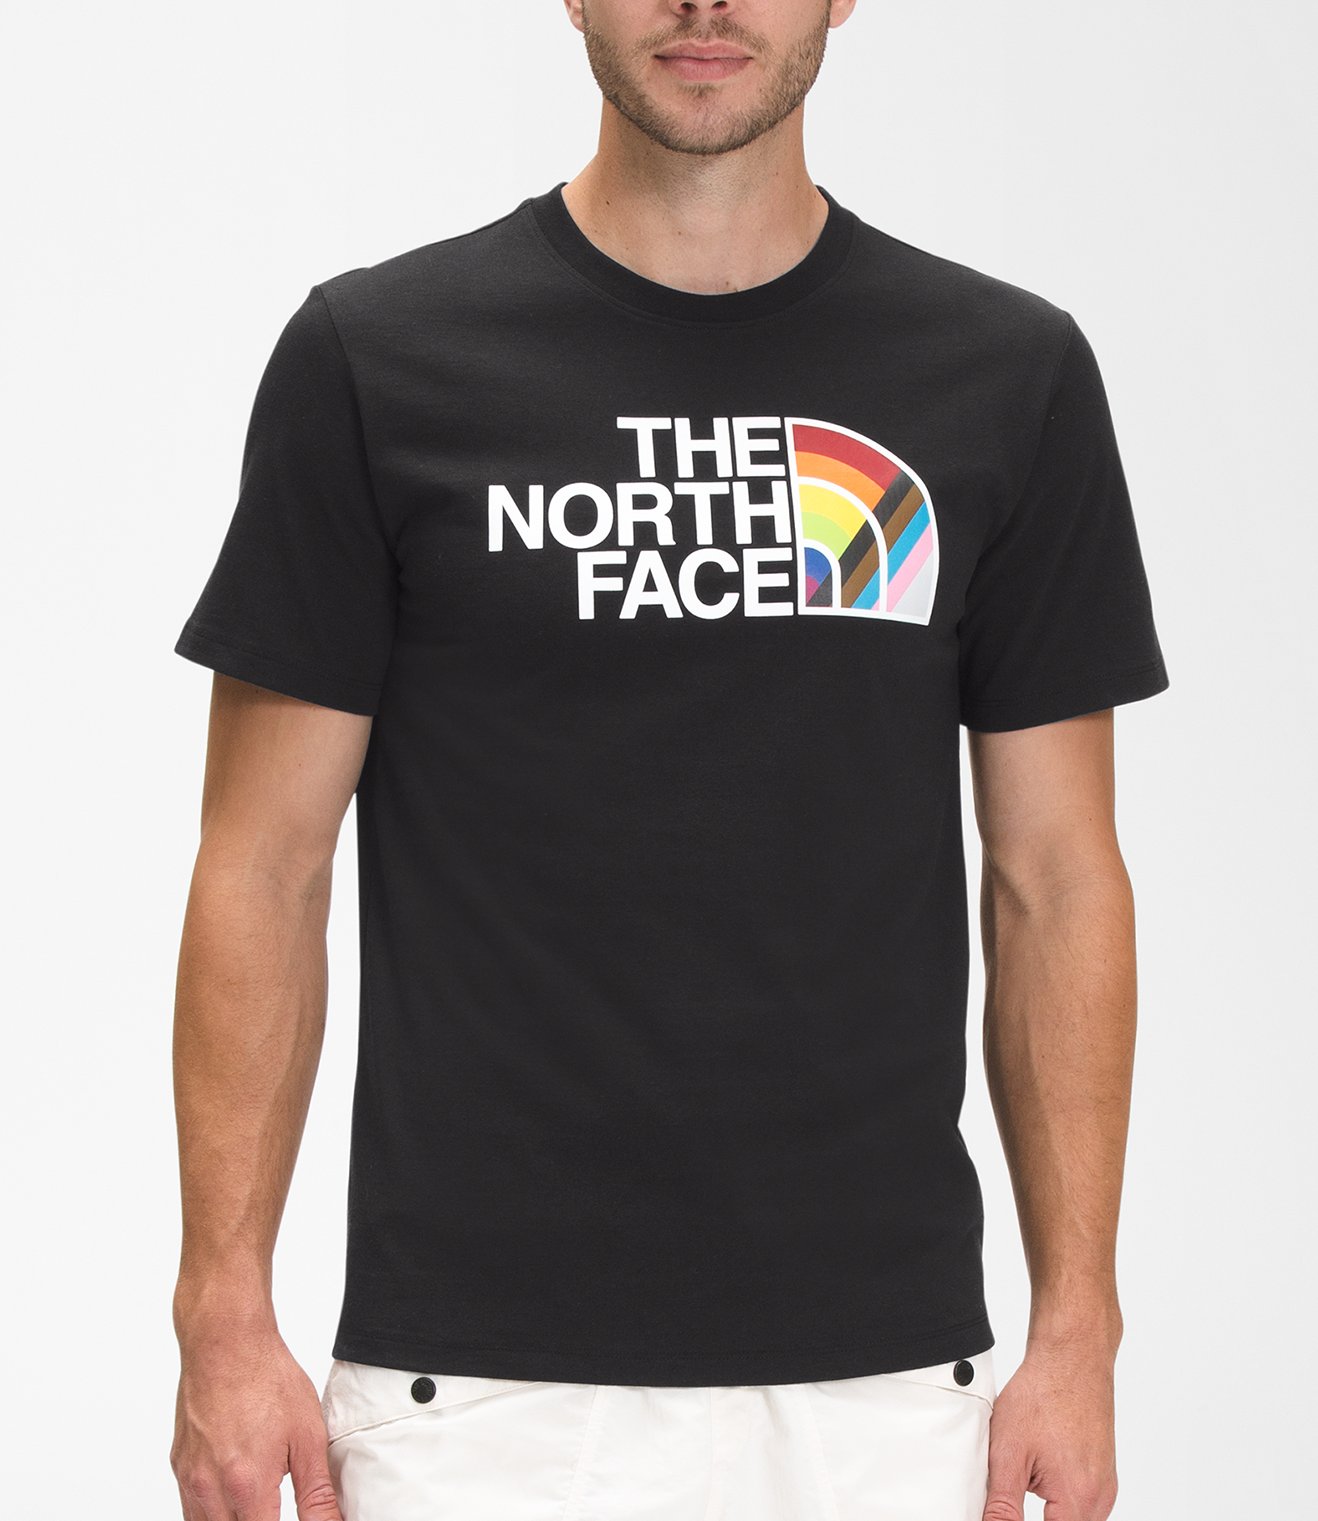 The North Face Pride Collection Clothing & Accessories 2022